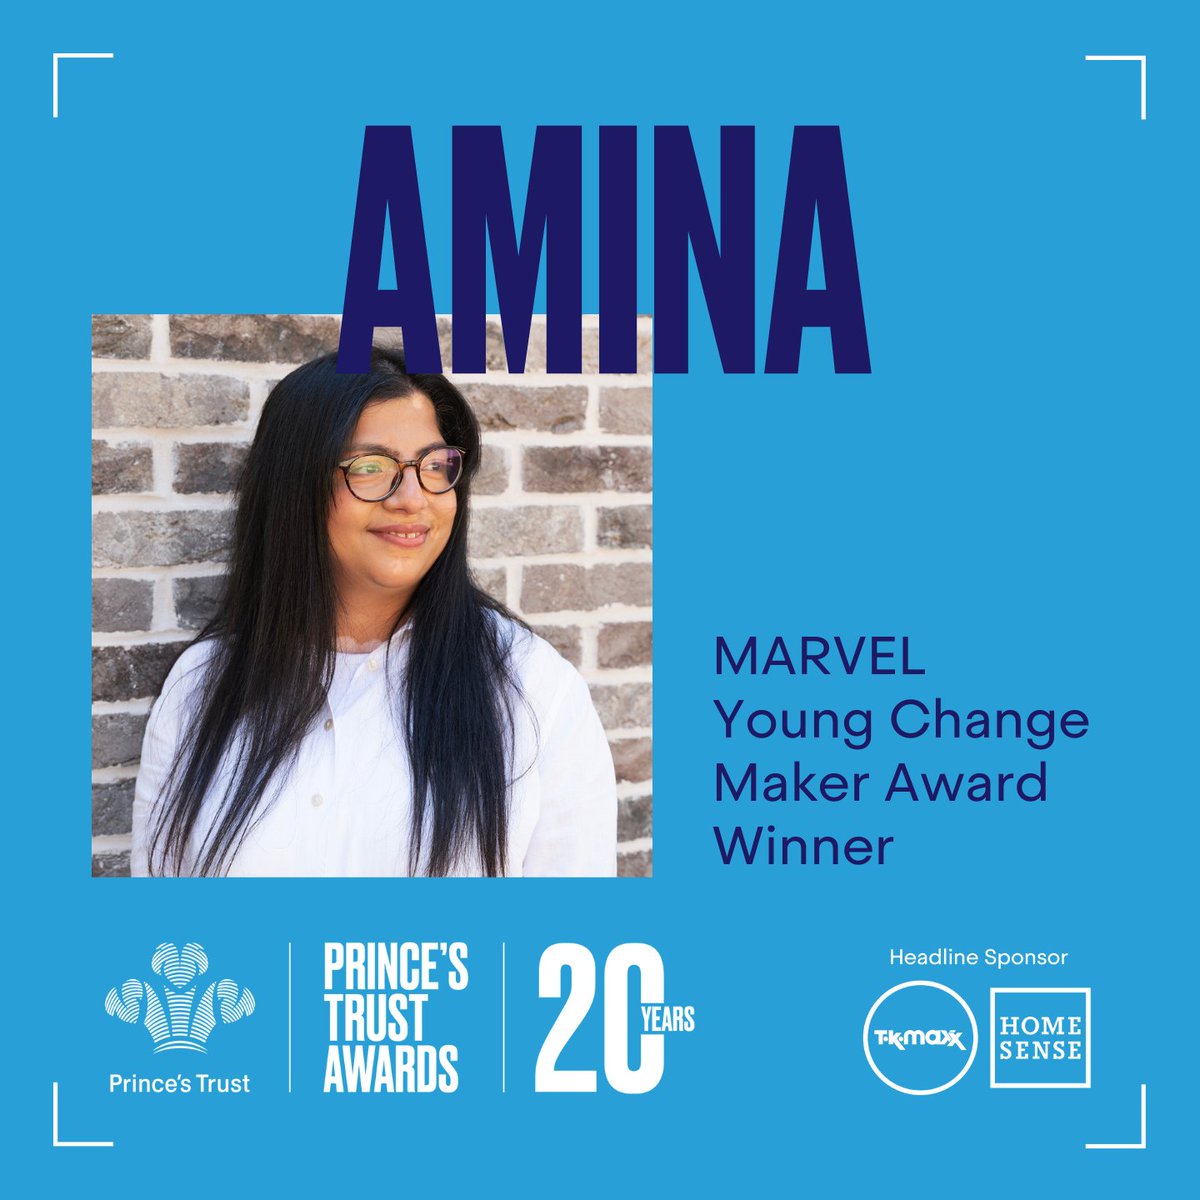 Taking our next #PrincesTrustAwards trophy is Amina, our @MarvelUK Young Change Maker! 🏆 Amina is a survivor who has transcended the challenges of Human Trafficking. Joining Team helped her reclaim her confidence and now she helps women who have faced similar experiences.